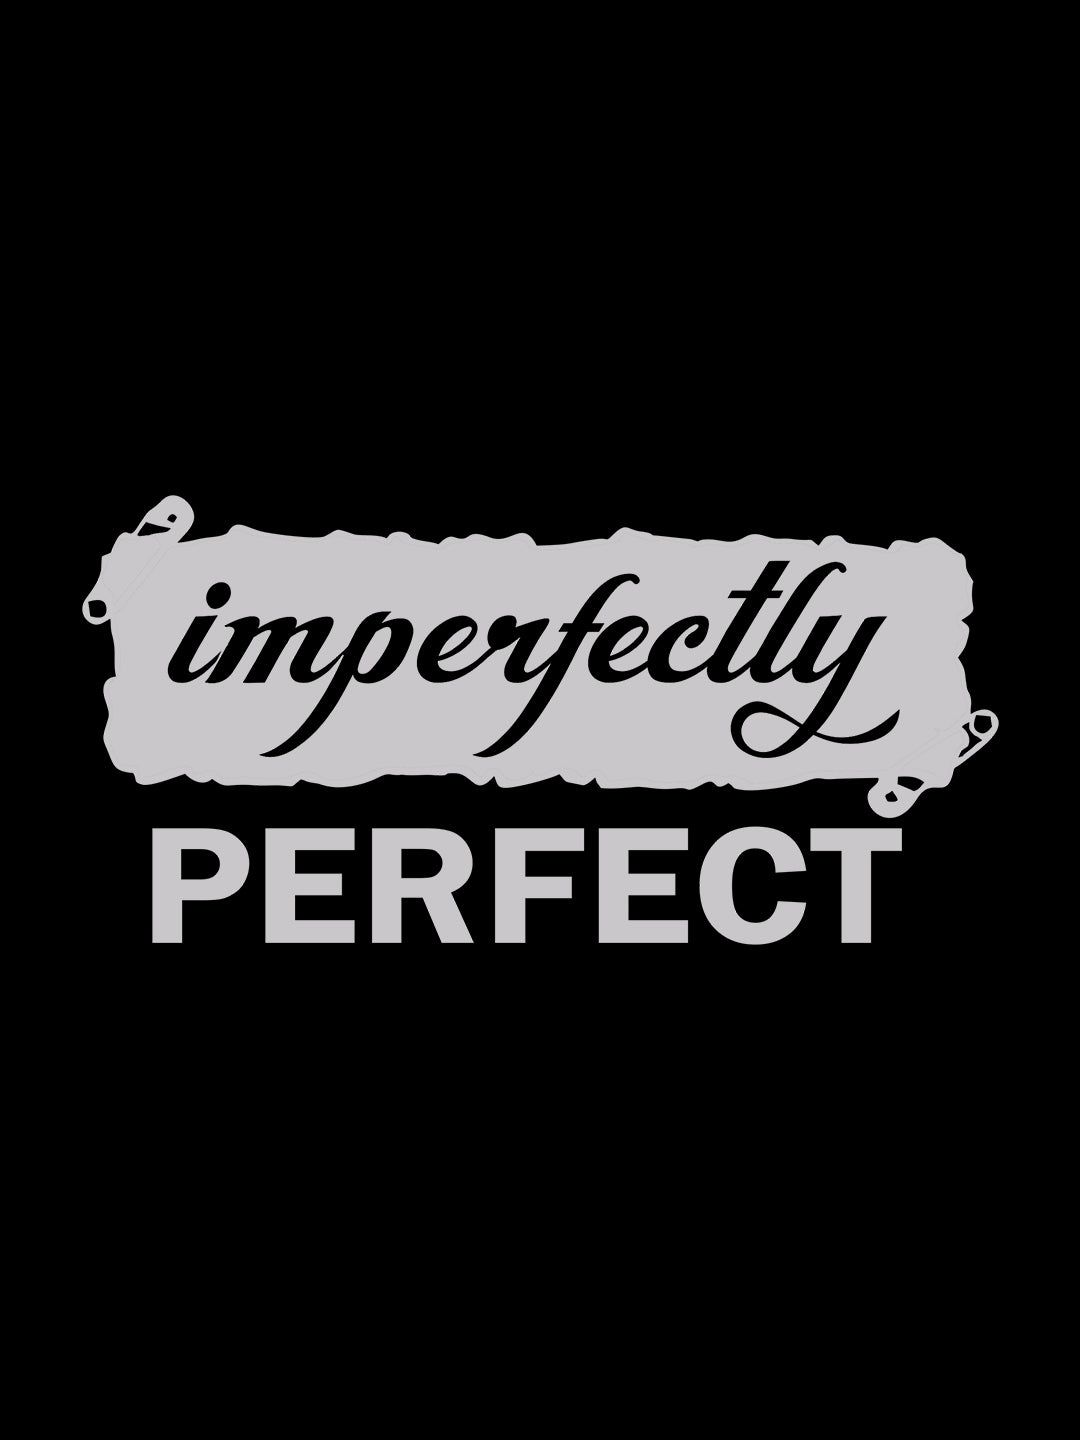 IMPERFECTLY PERFECT BLACK T-SHIRT